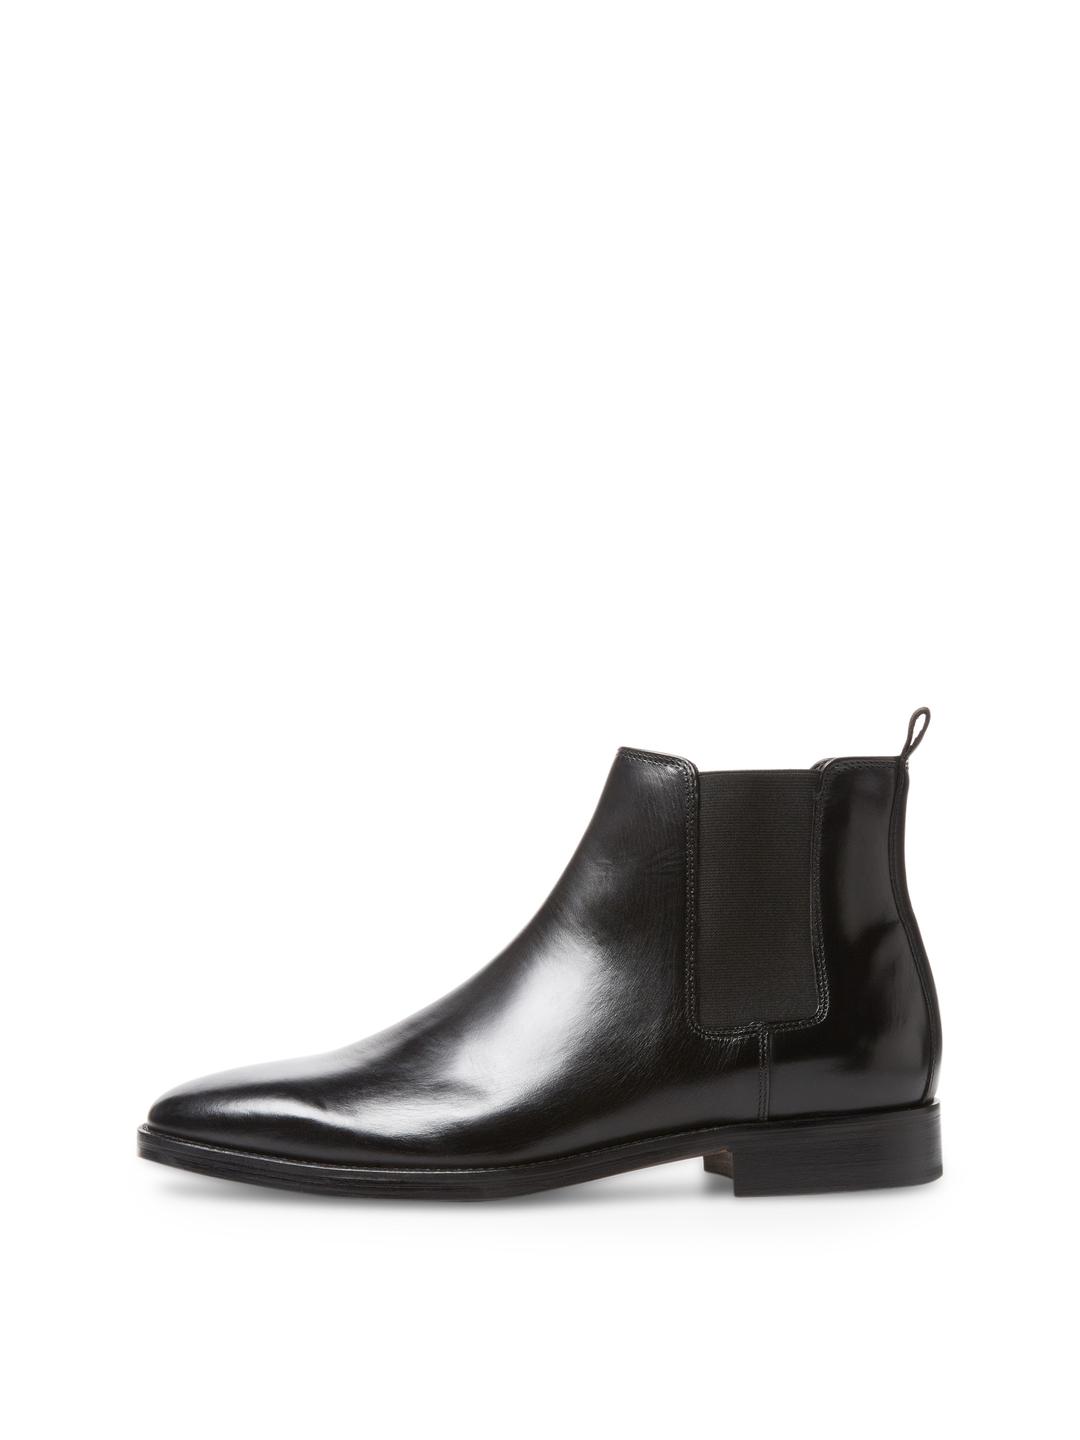 Bruno Magli Leather Cuneo Chelsea Boot in Black for Men - Lyst